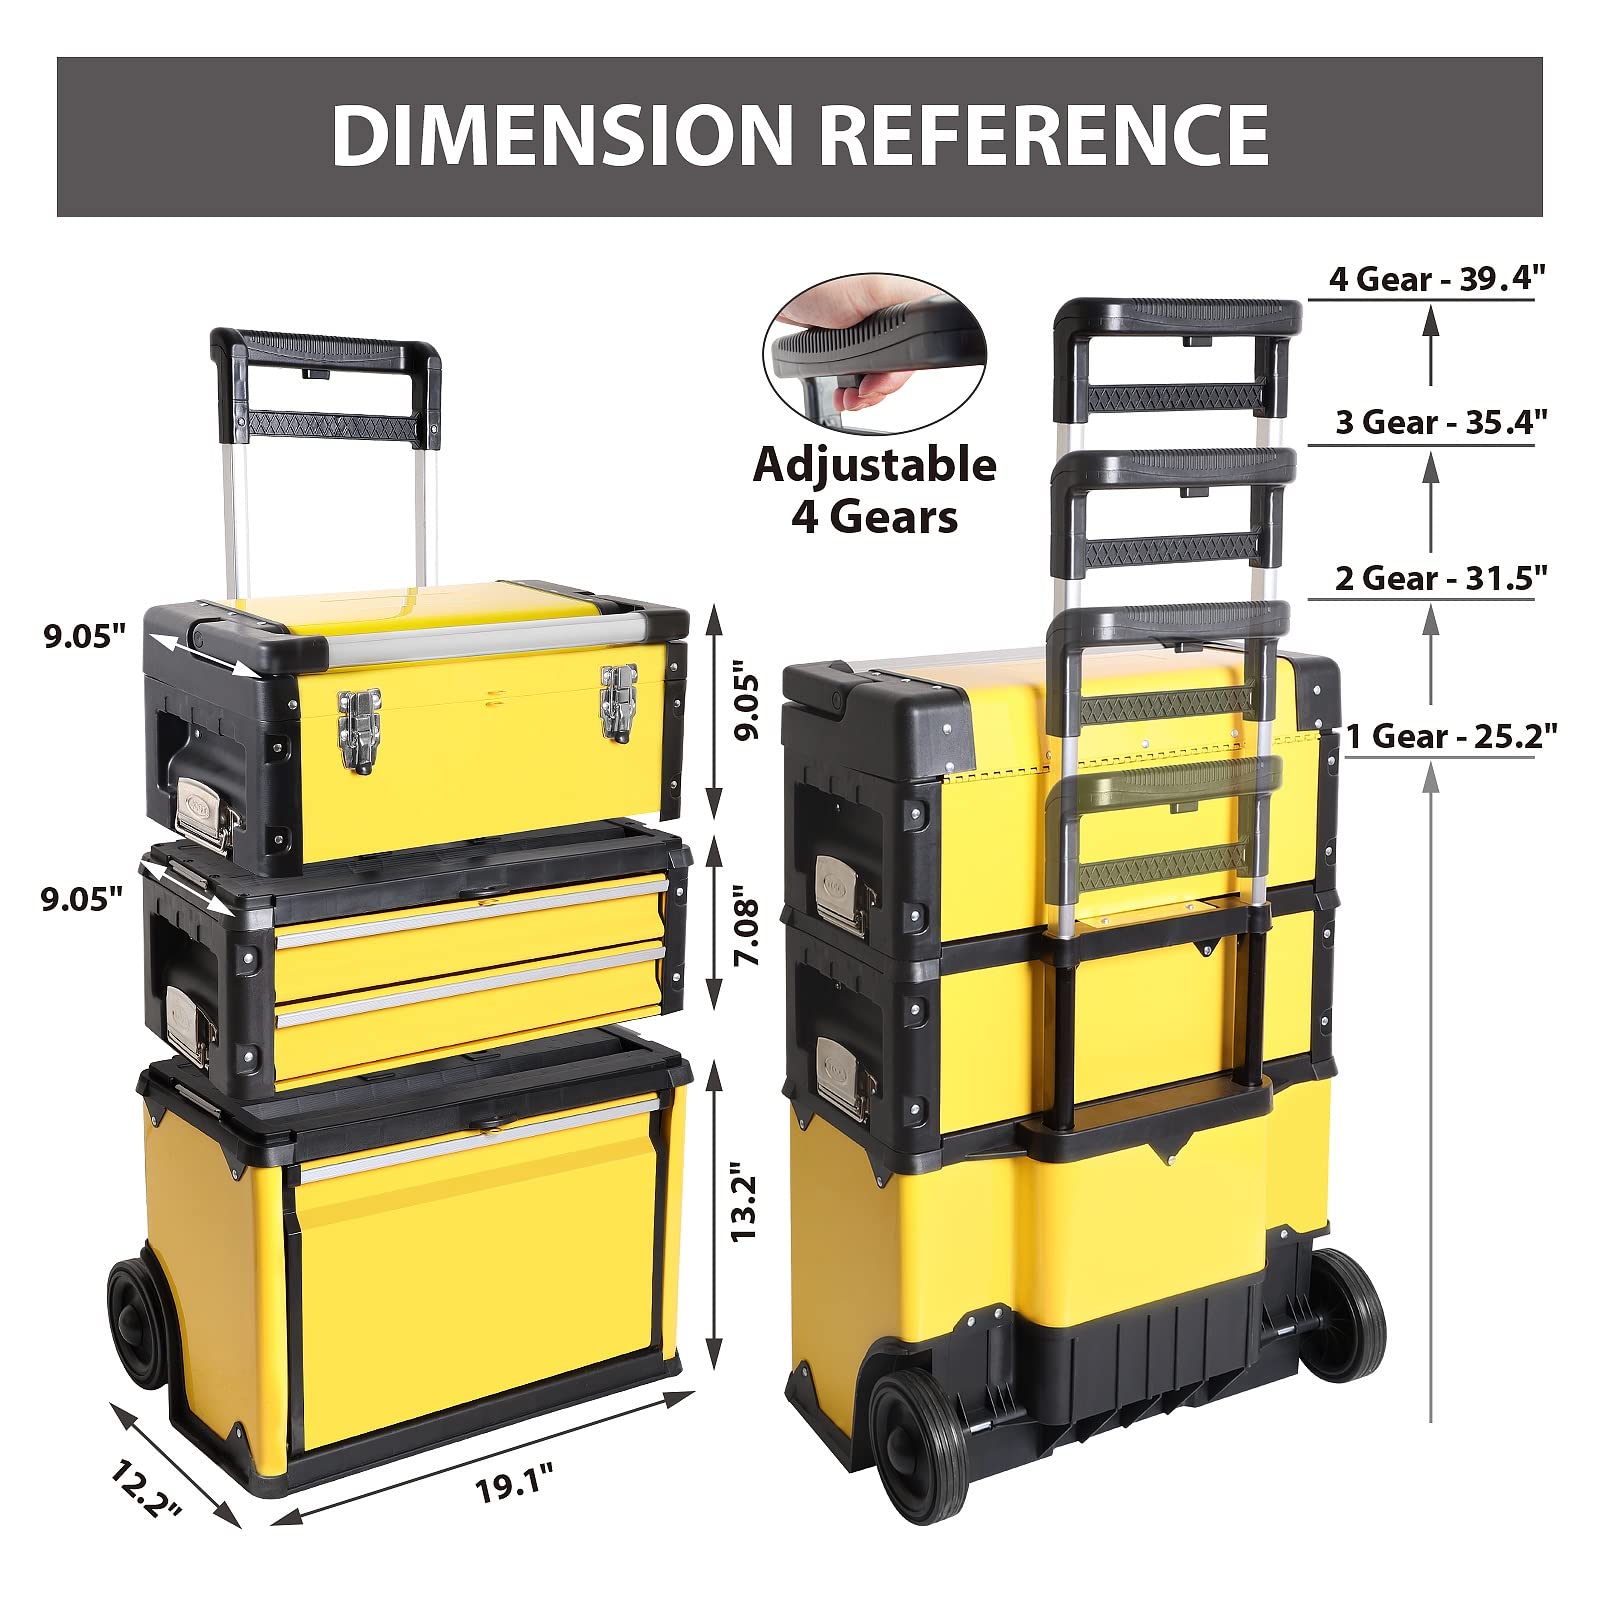 BIG RED Stackable Rolling Tool Box Portable Metal Toolbox Organizer with Wheels and 2 Drawers Separate Rolling Upright Trolley Tool Chest for Garage or Workshop,Yellow,ATRJF-C305ABDY